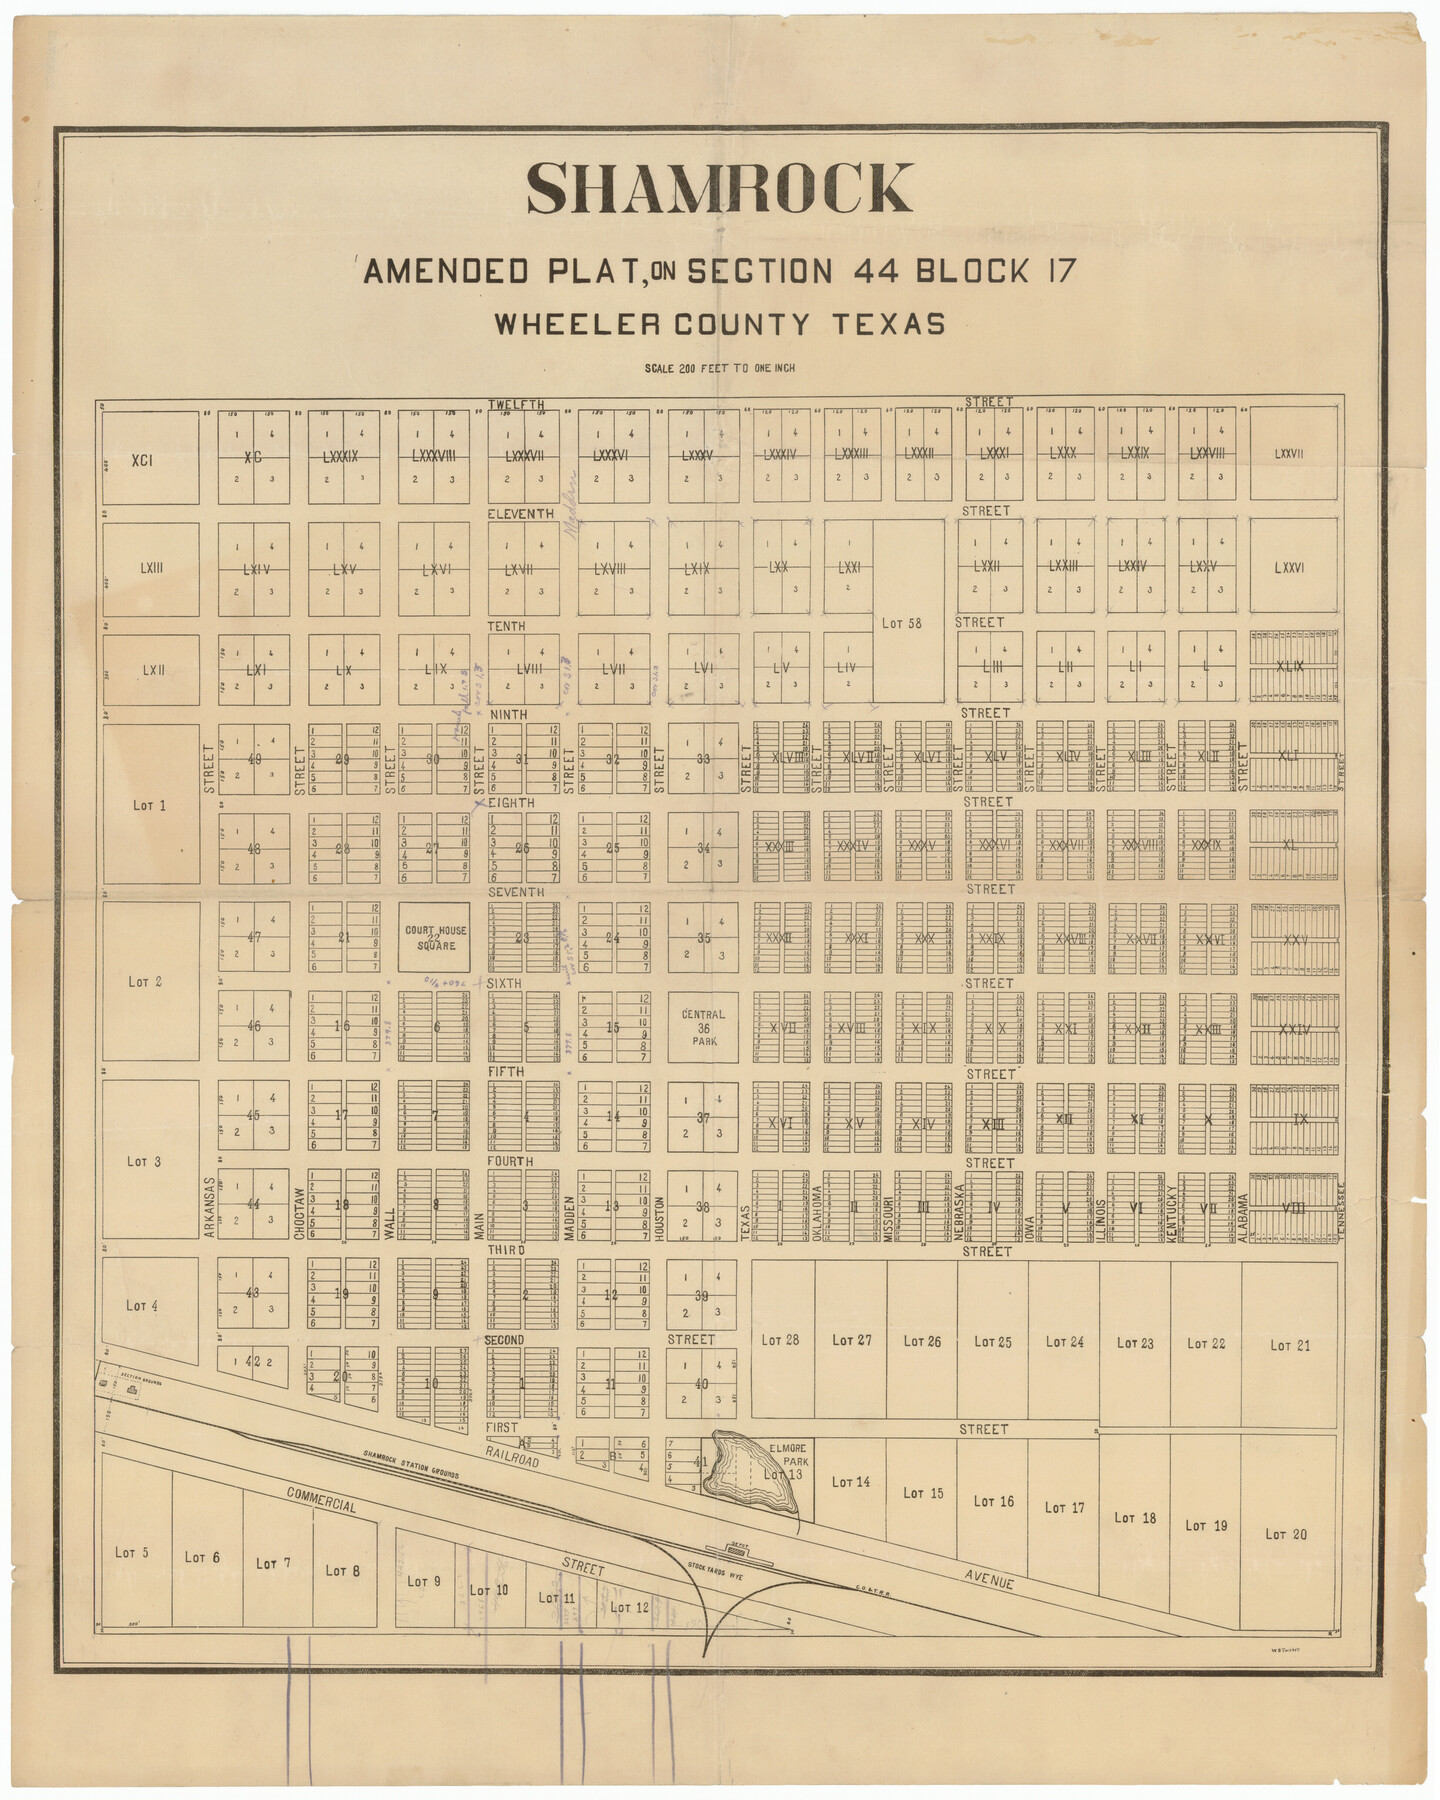 92132, Shamrock, Amended Plat on Section 44, Block 17, Wheeler County, Texas, Twichell Survey Records